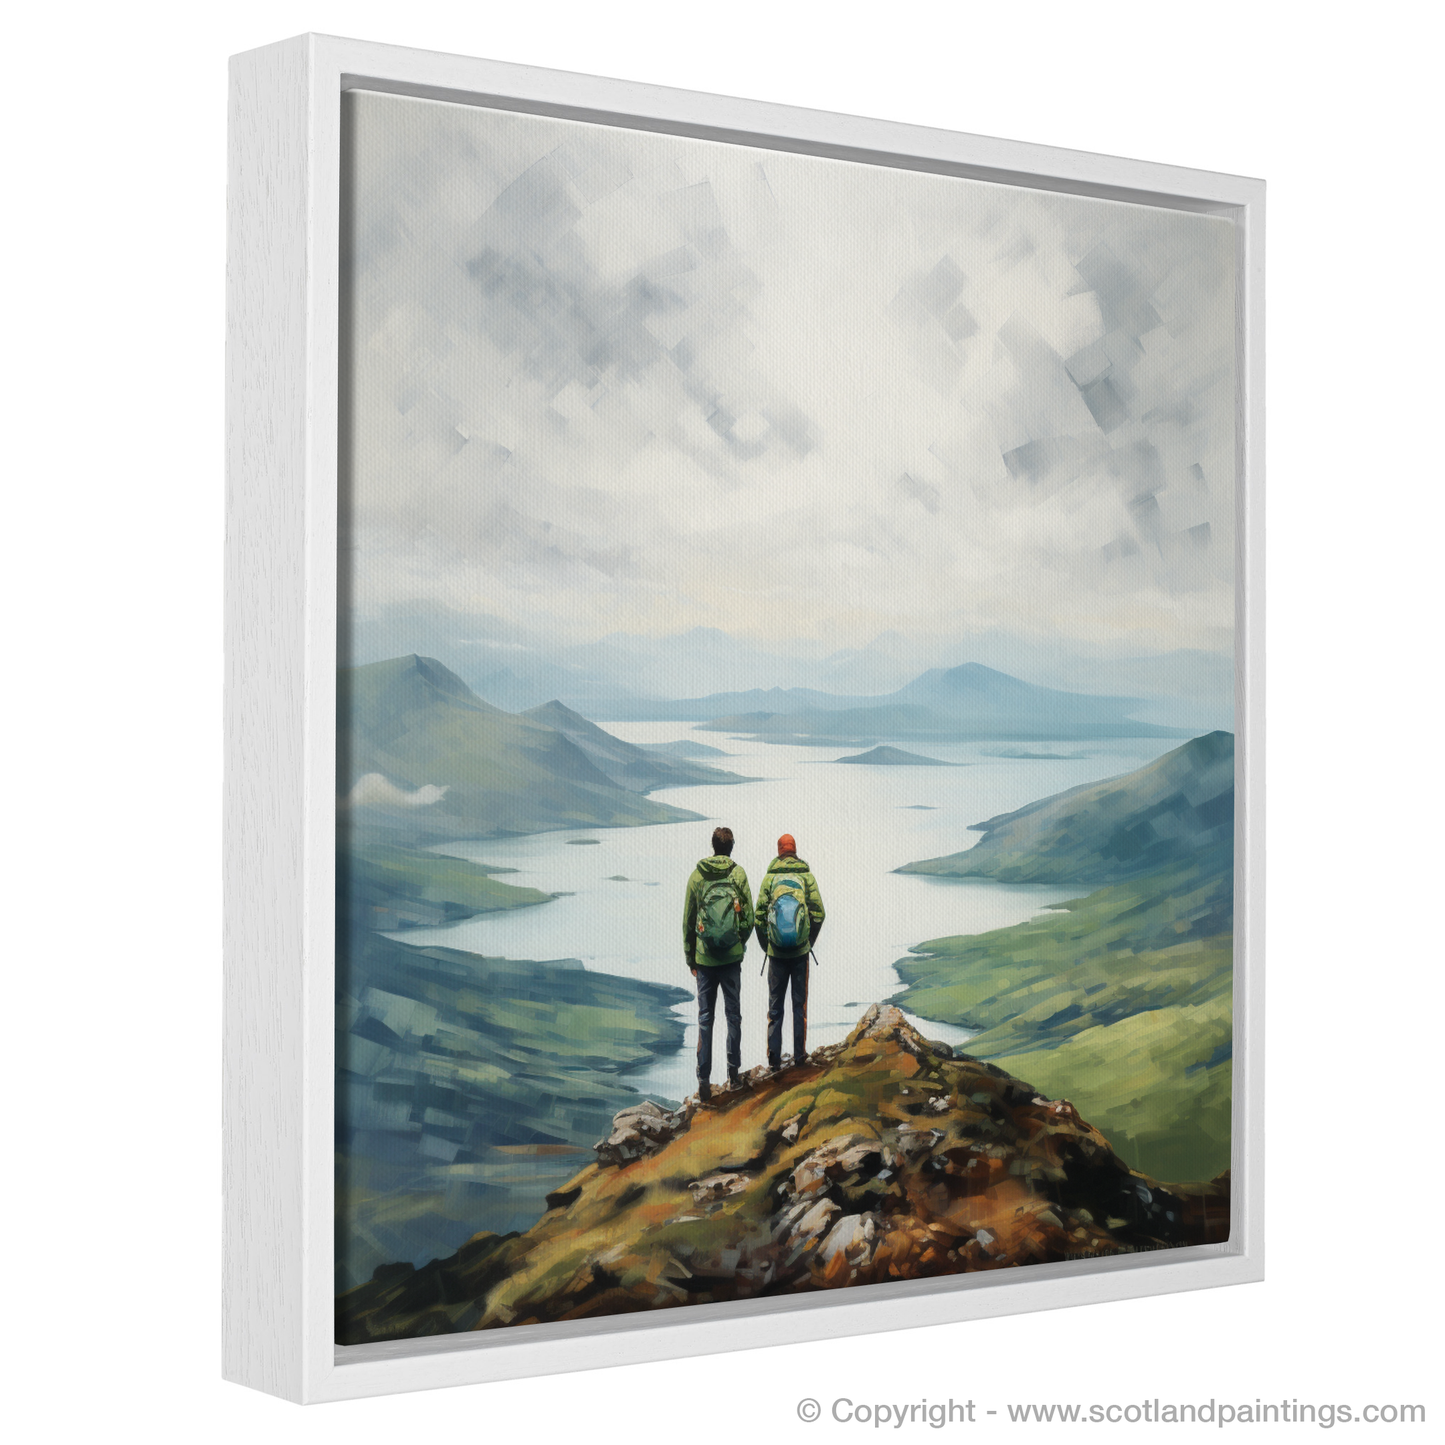 Painting and Art Print of Two hikers looking out on Loch Lomond entitled "Highland Companions: Contemplation at Loch Lomond".